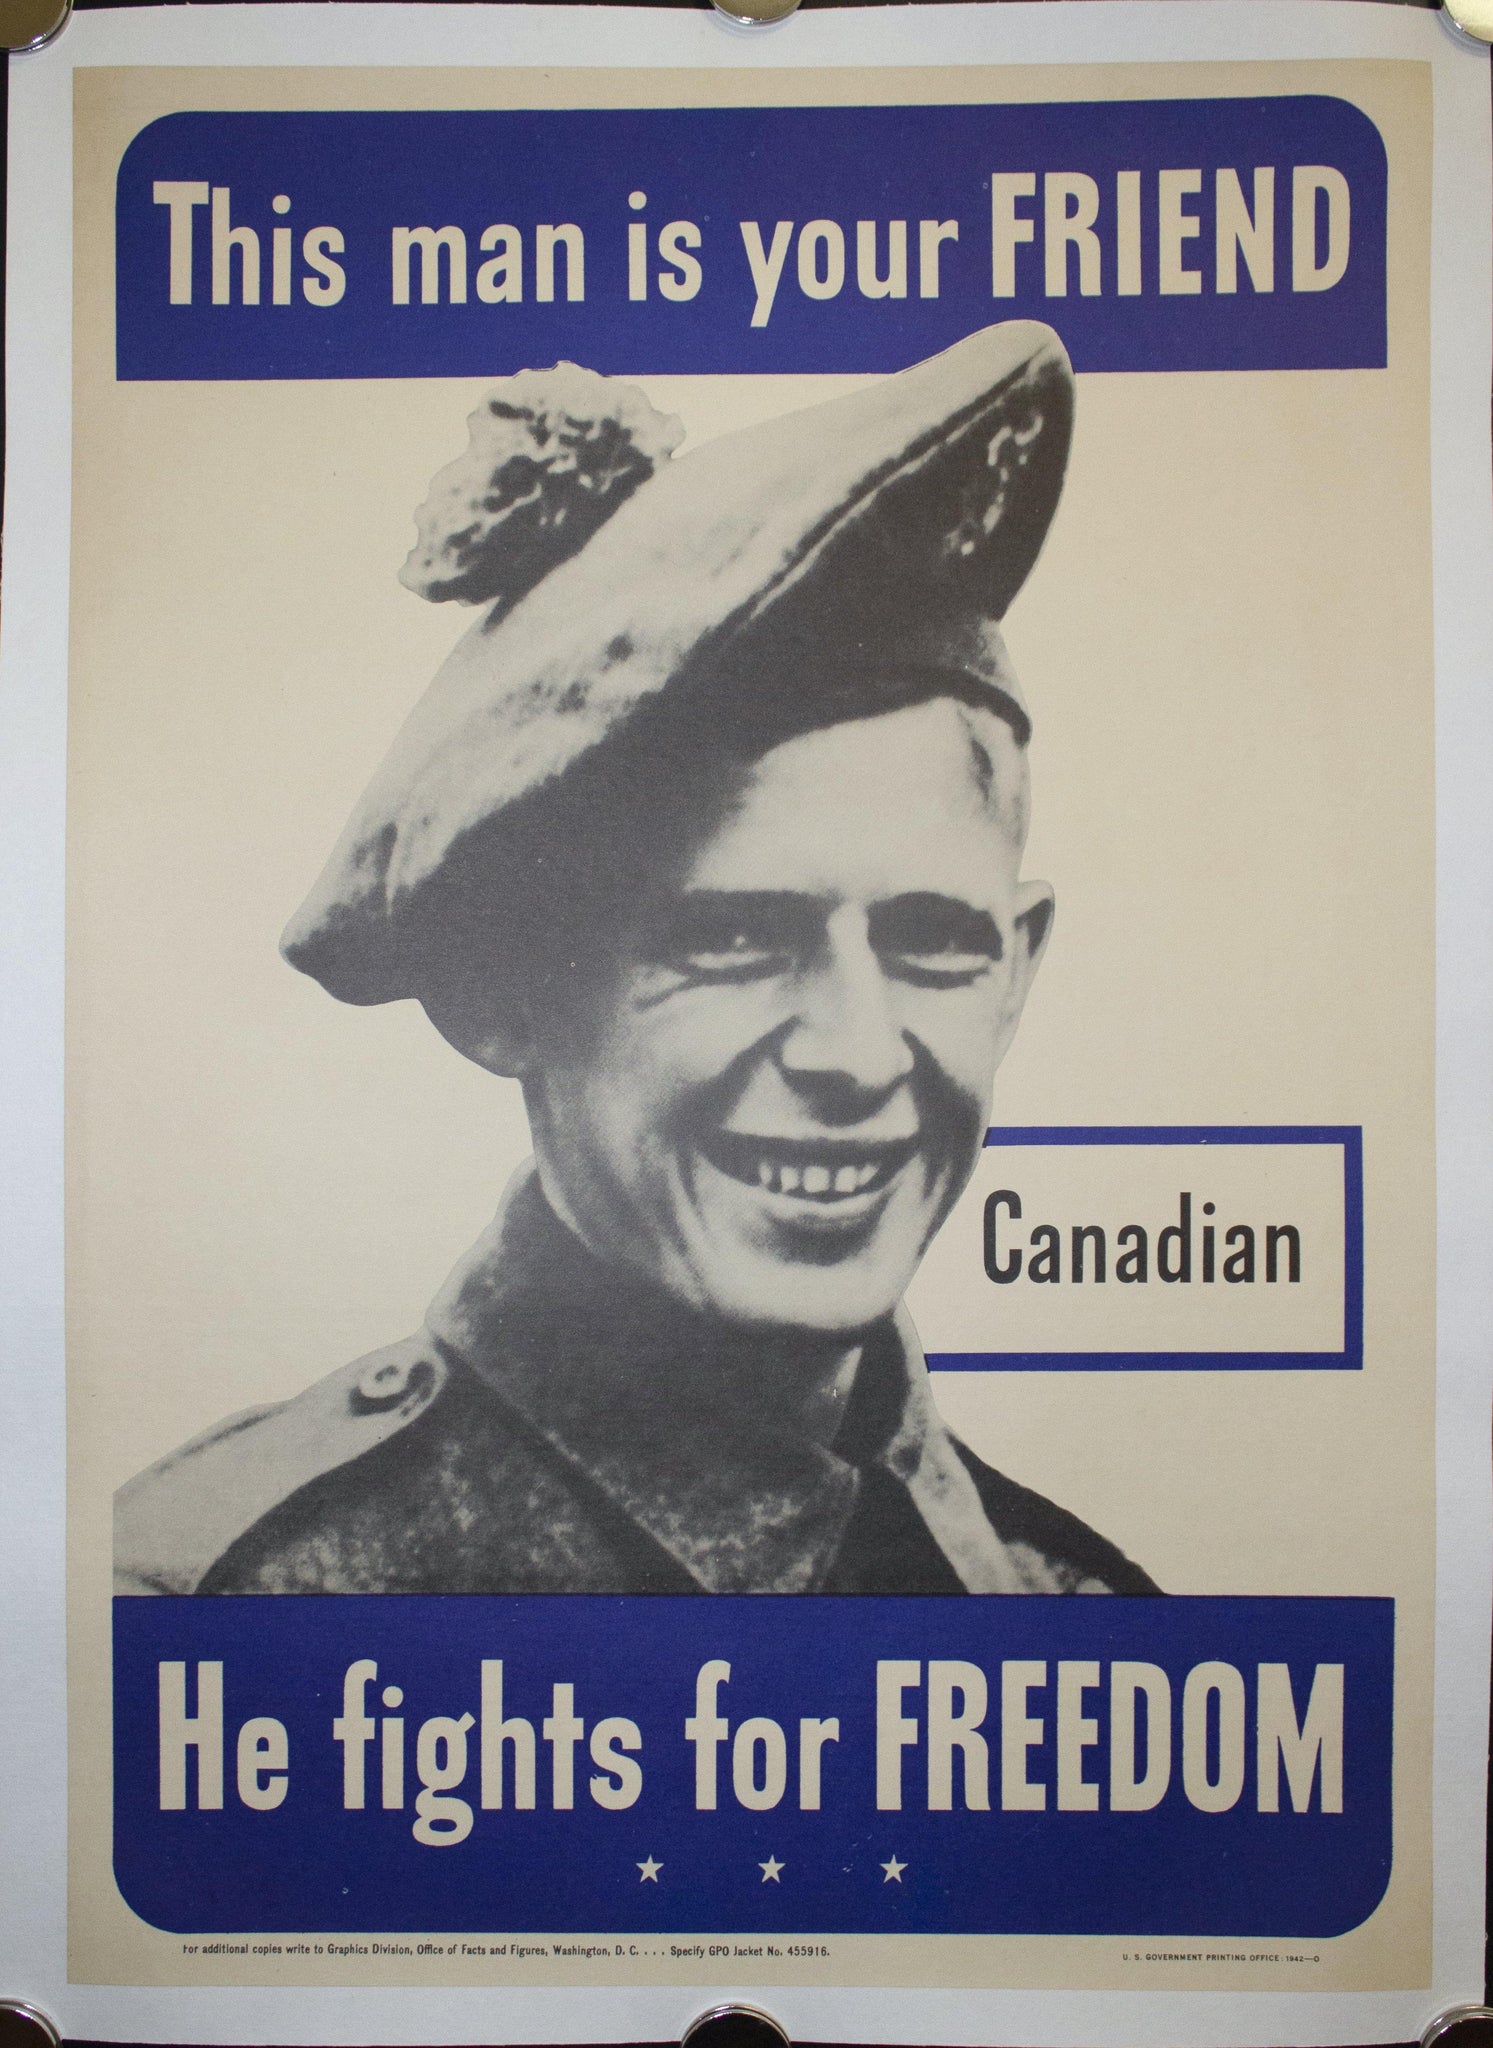 1942 This Man Is Your Friend He Fights For Your Freedom - Canadian 20.5 X 14.5 - Golden Age Posters